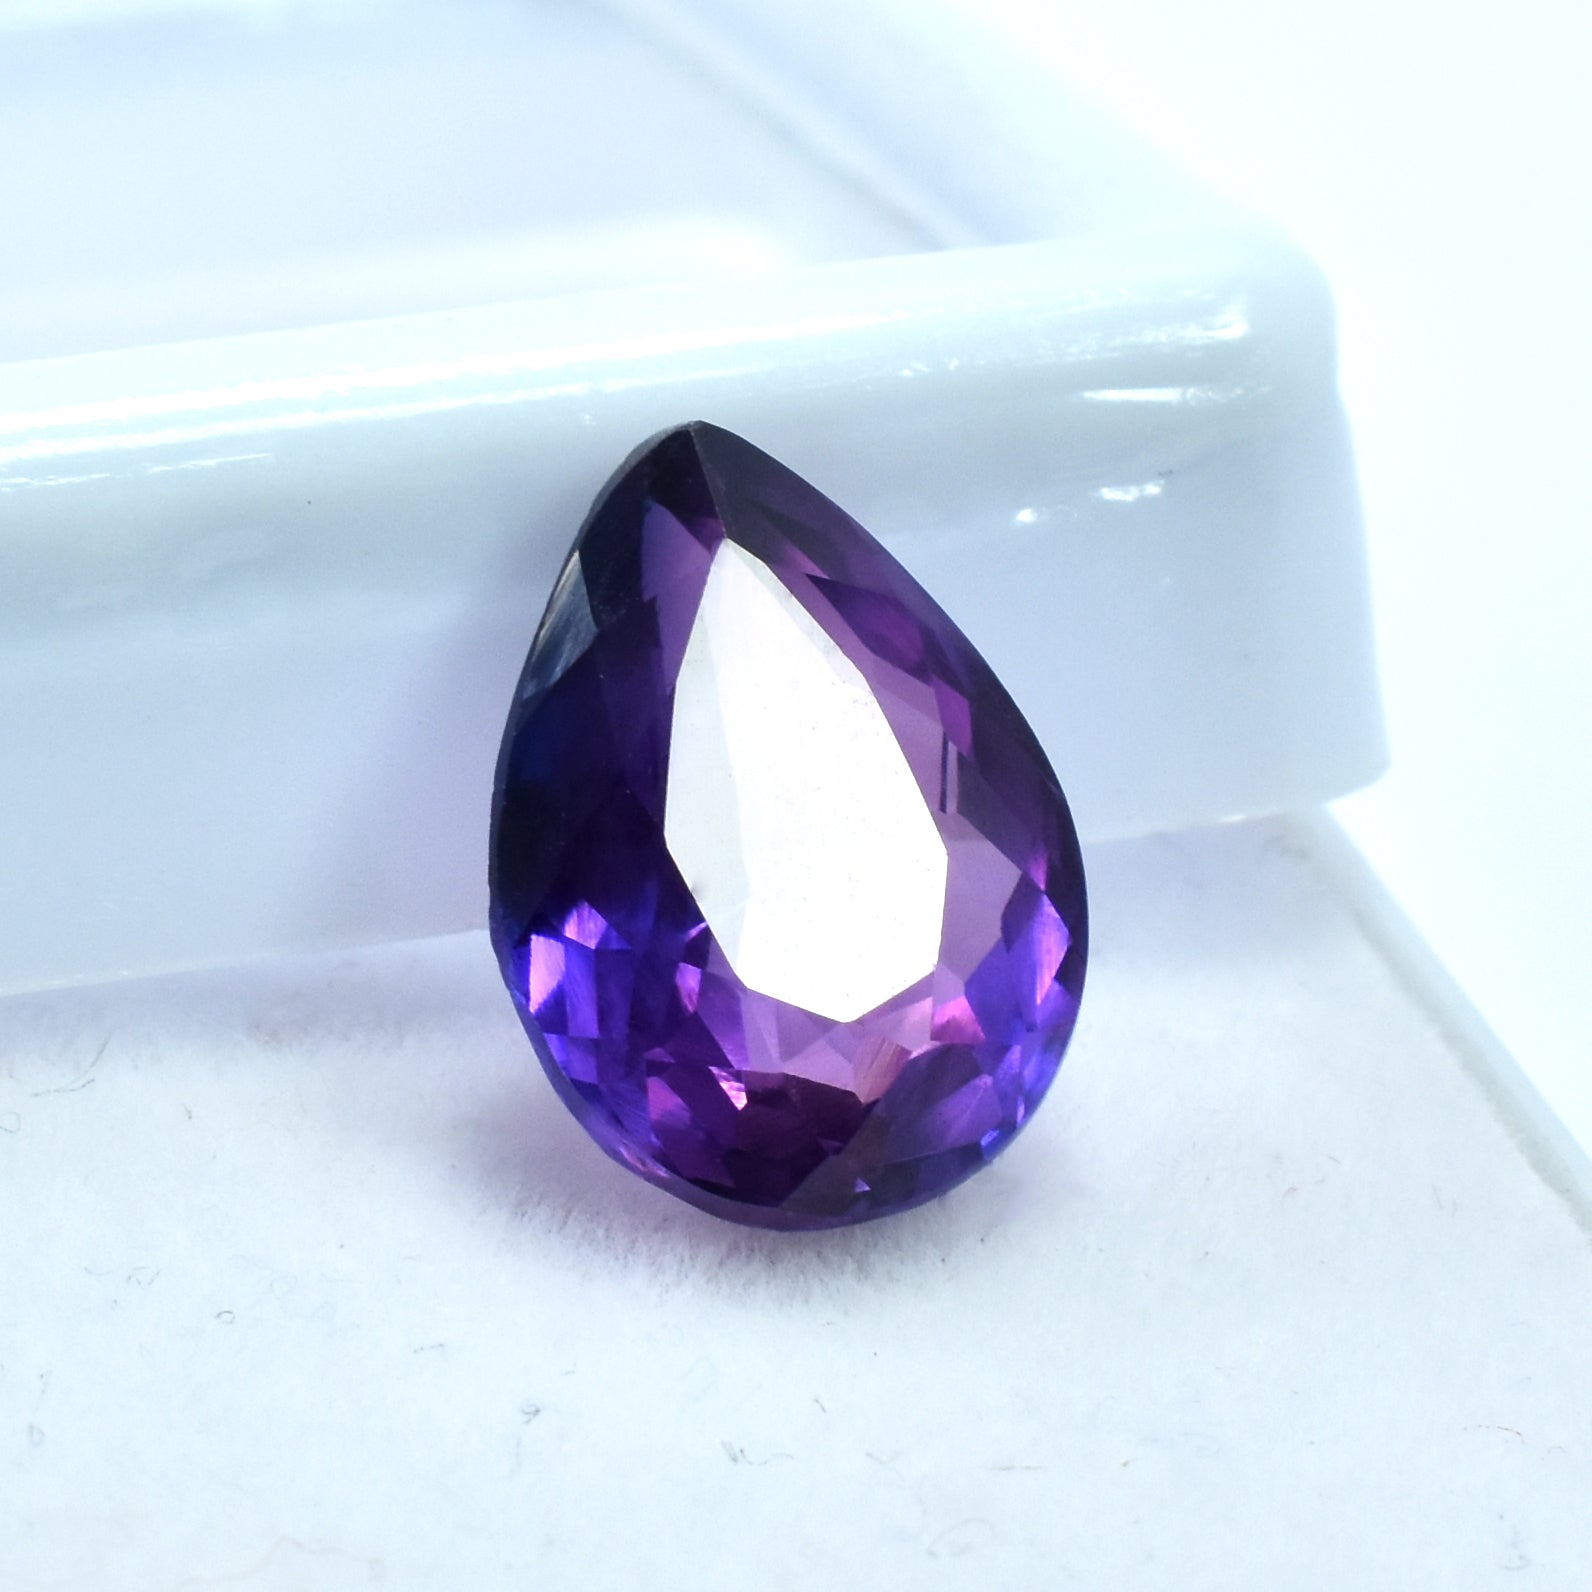 Brilliant Gift For Wife !!! Color Change Sapphire 9.65 Carat Pear Shape Natural Purple Sapphire Certified Loose Gemstone , Sapphire Jwelery , Sapphire On Sale